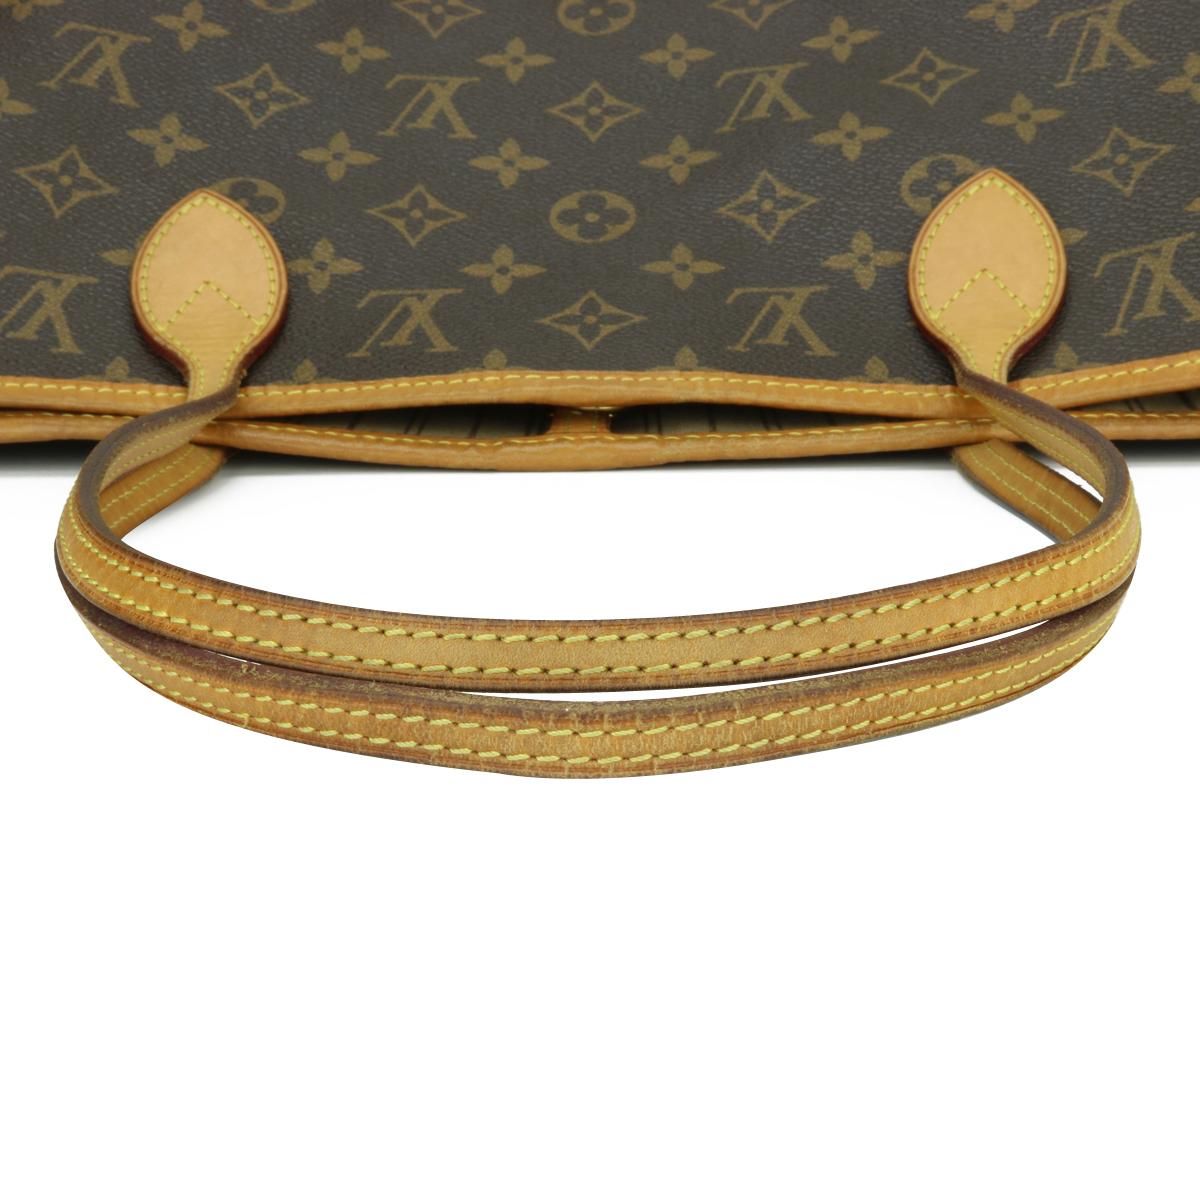 Louis Vuitton Neverfull MM Bag in Monogram with Beige Interior 2017 For Sale 6